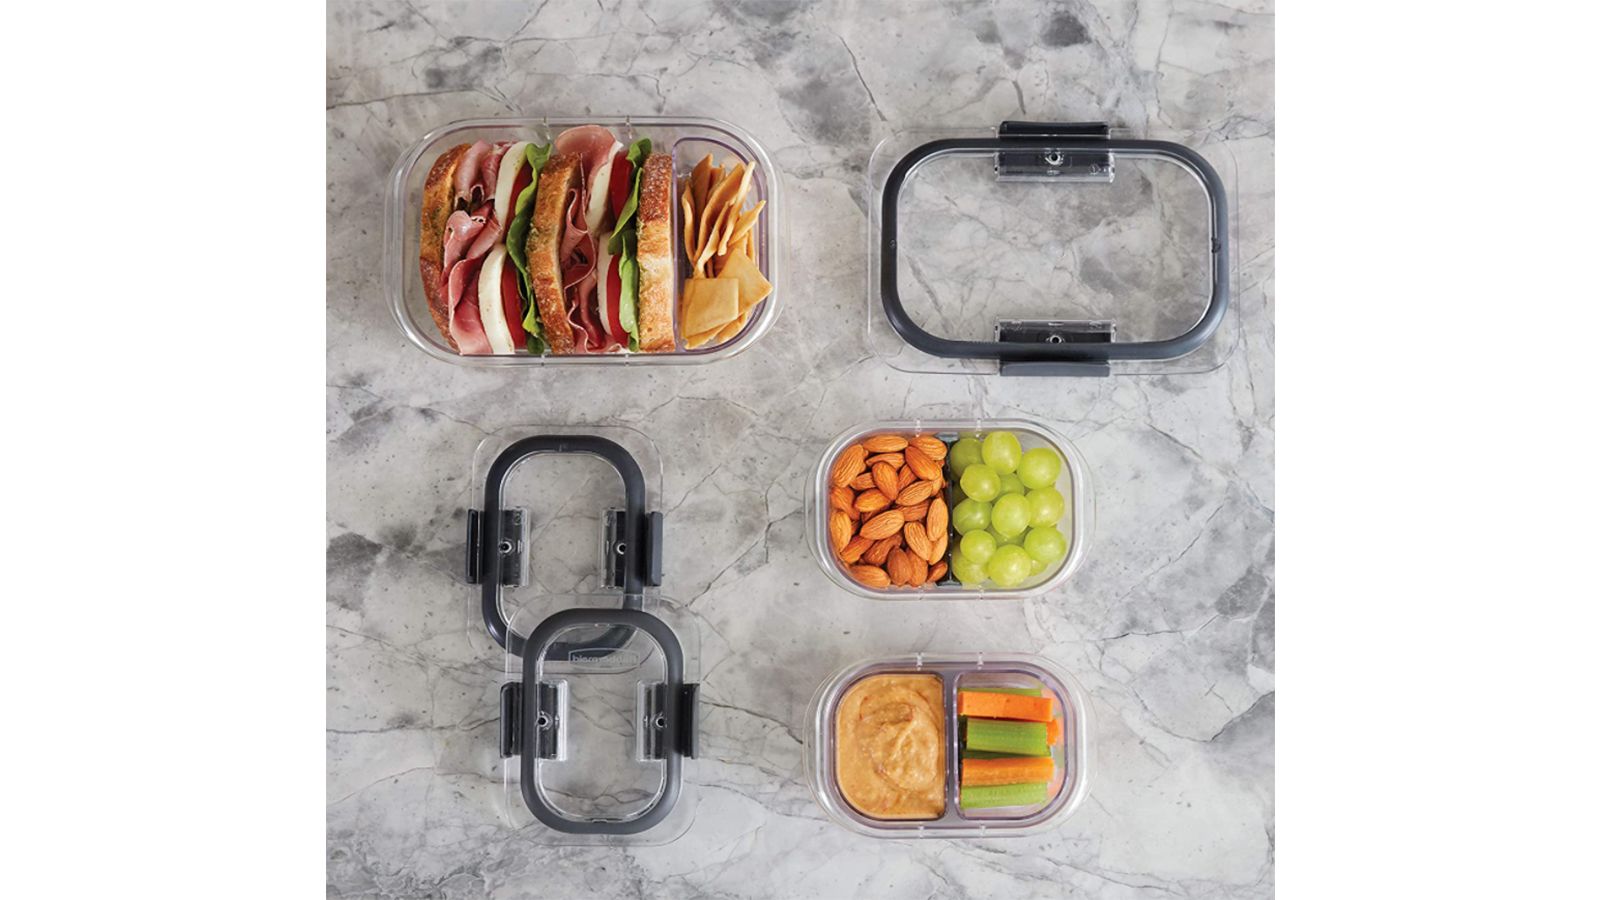 https://media.cnn.com/api/v1/images/stellar/prod/210930103731-best-meal-prep-containers-rubbermaid-brilliance-food-storage-containers-set-of-10.jpg?q=w_1601,h_900,x_0,y_0,c_fill